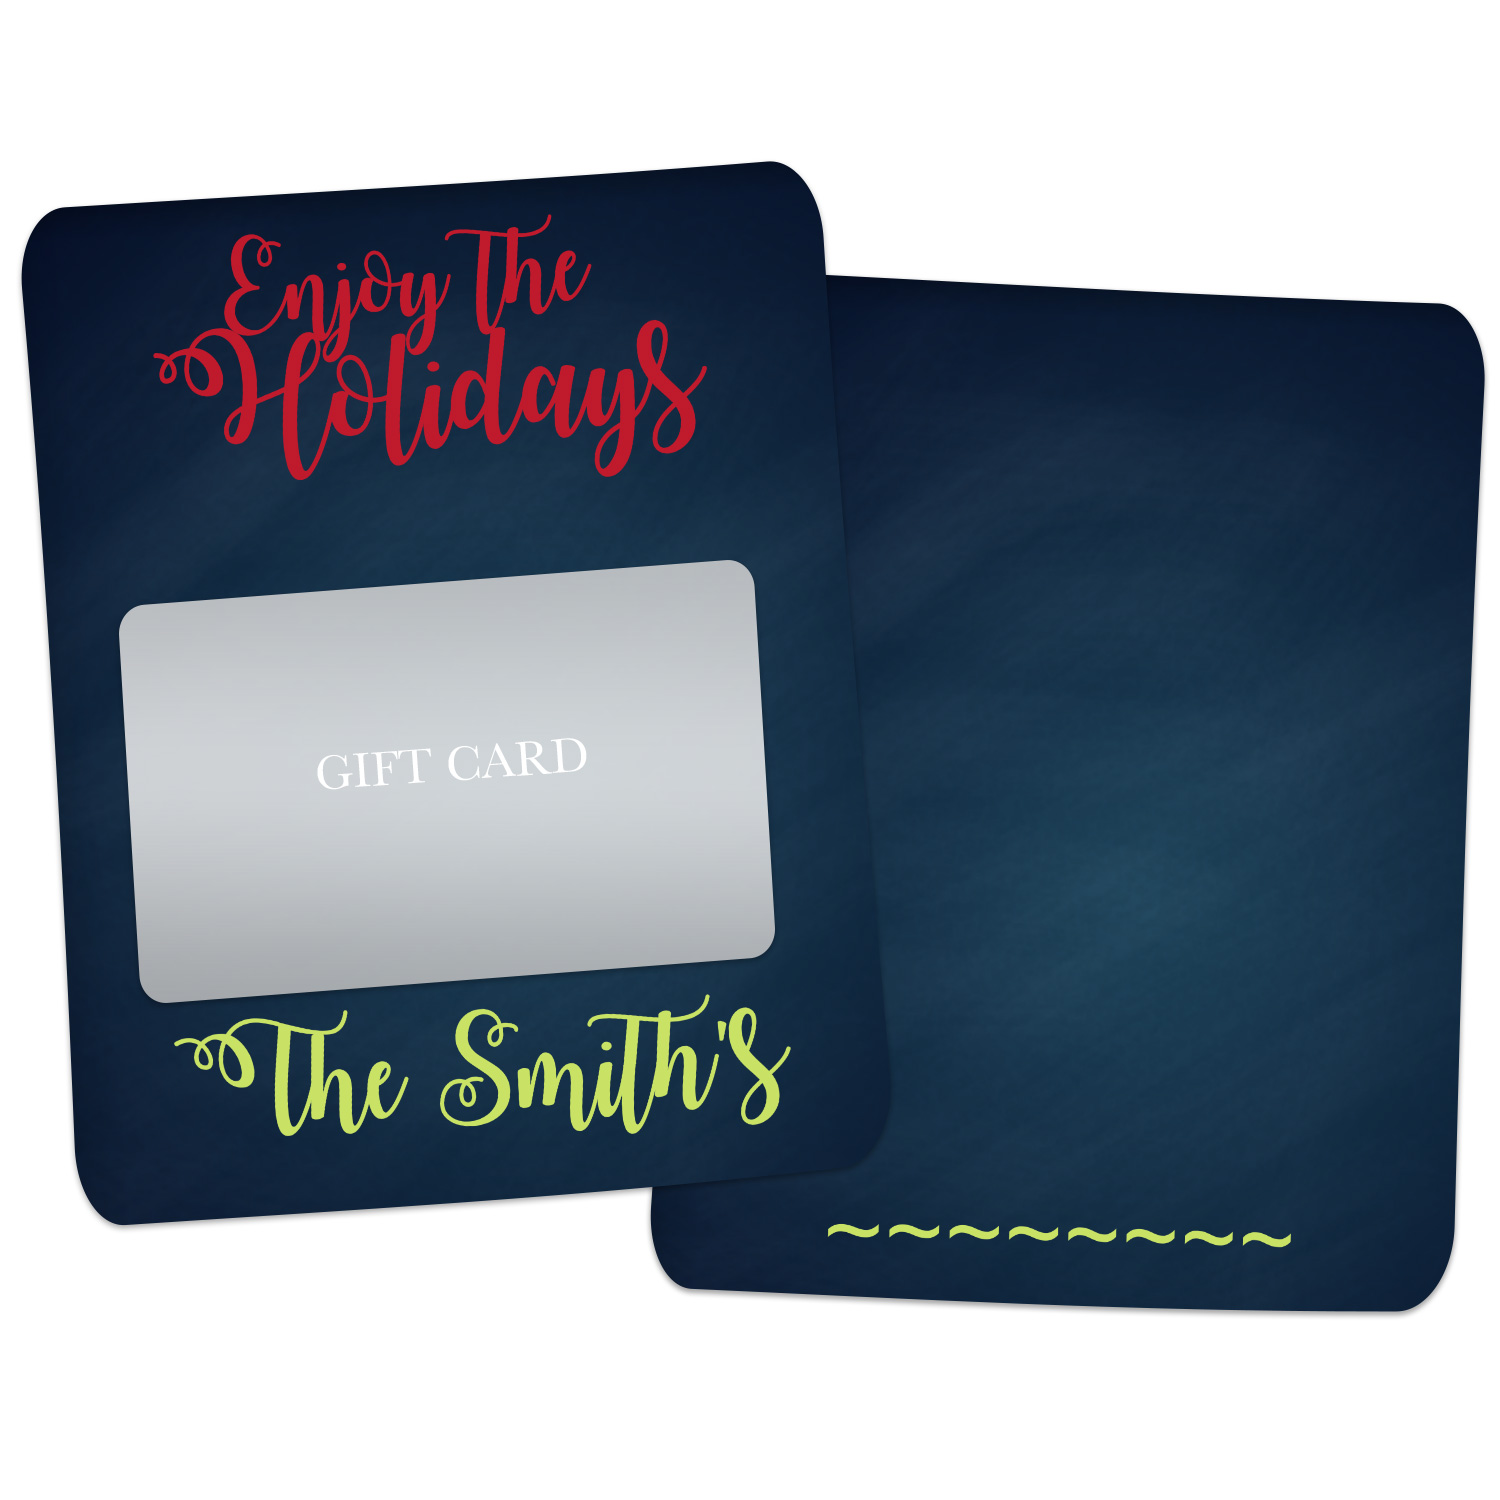 The Holidays Gift Card Holders